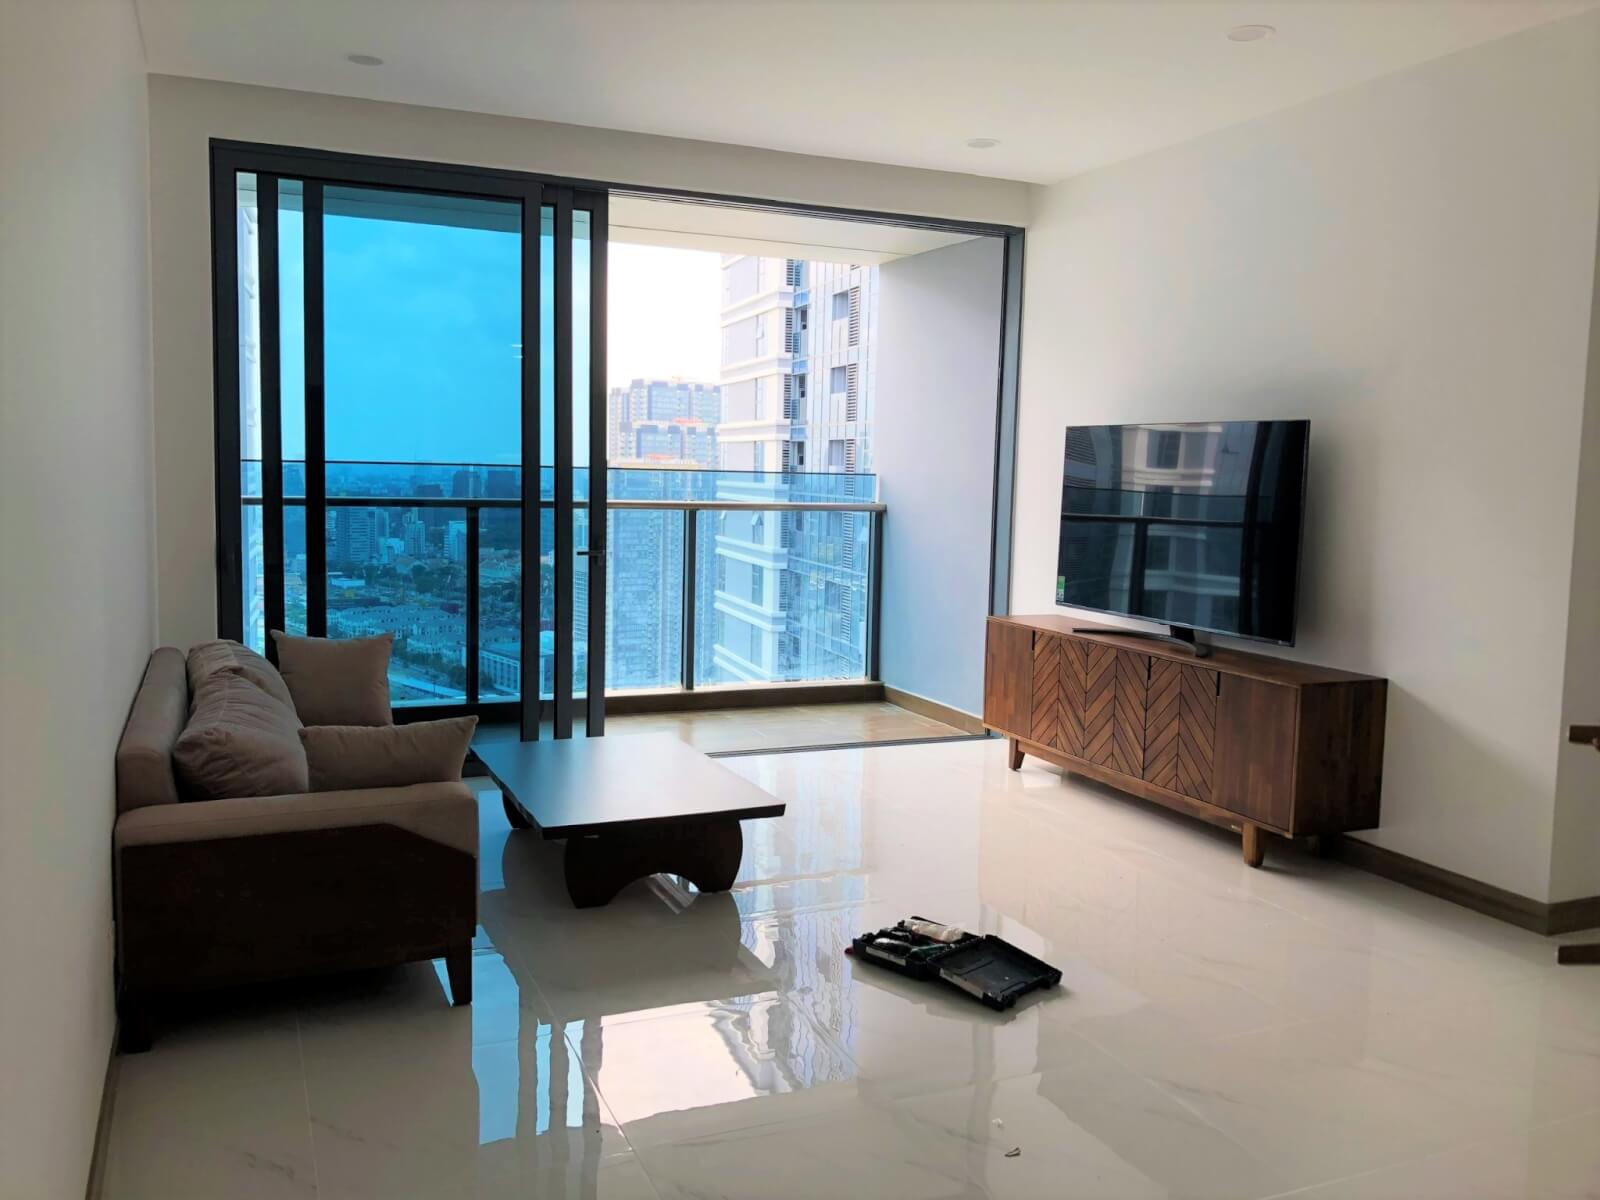 Sunwah Pearl Golden House apartment for rent - 3 bedrooms, modern lifestyle